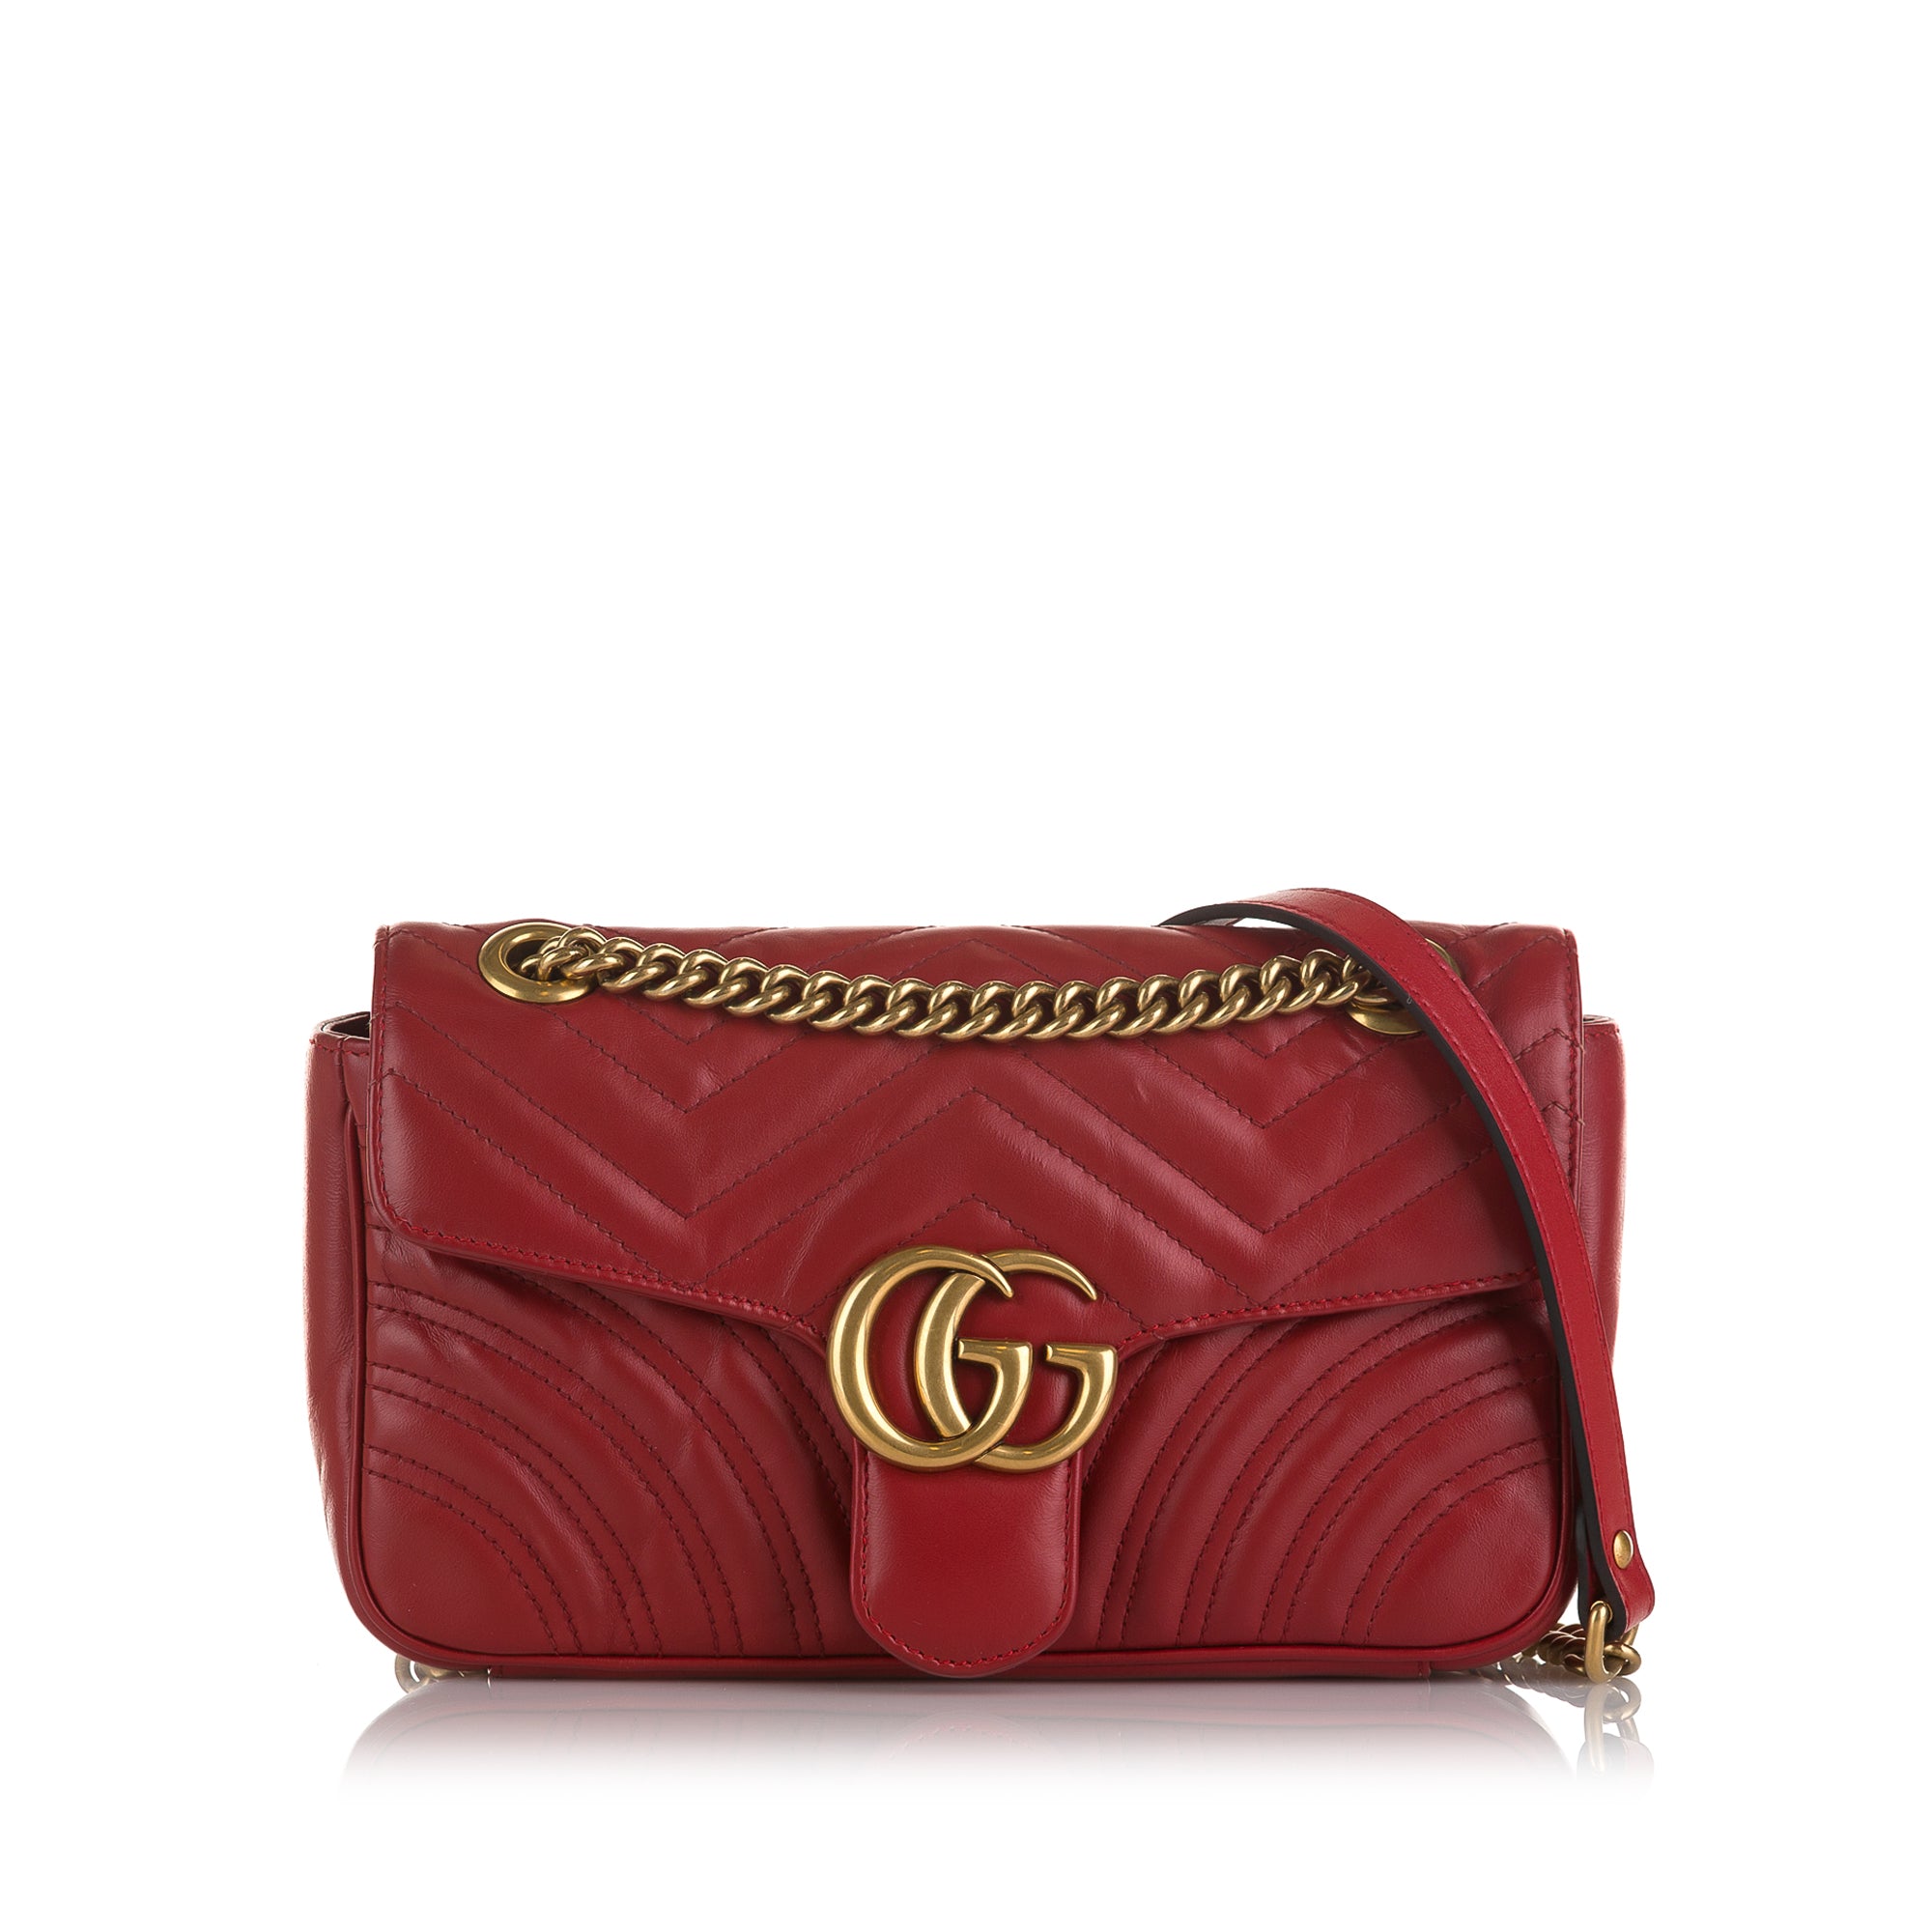 Gucci `Gg Marmont` Mini Bag in Red